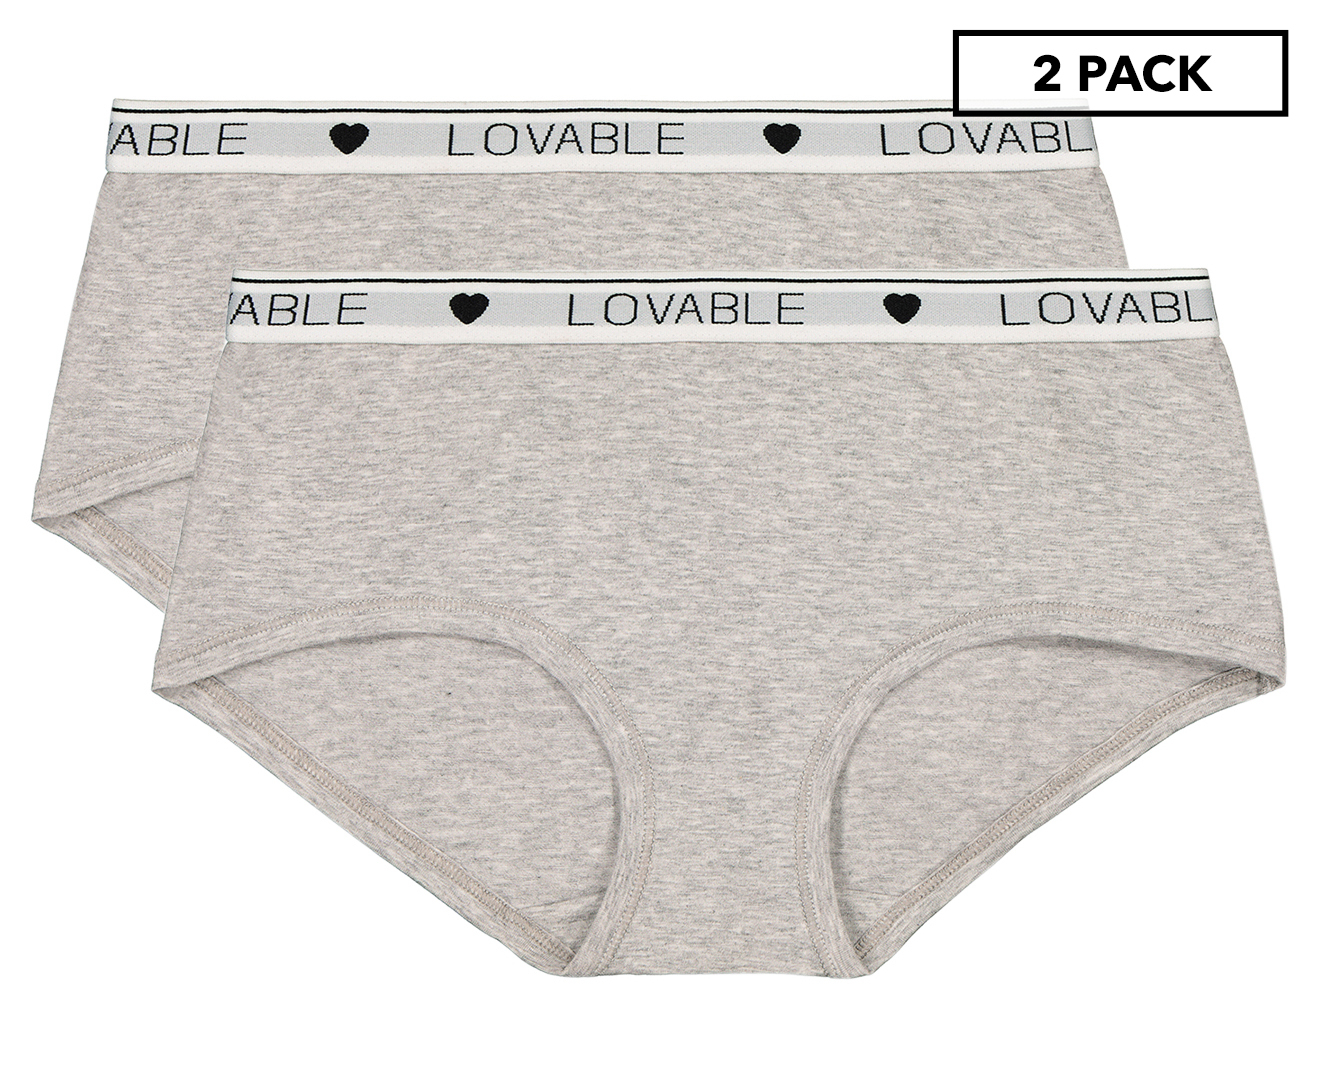 Lovable Women's Everyday Cotton Hipster Boyleg 2-Pack - Grey Marle/White |  Catch.com.au